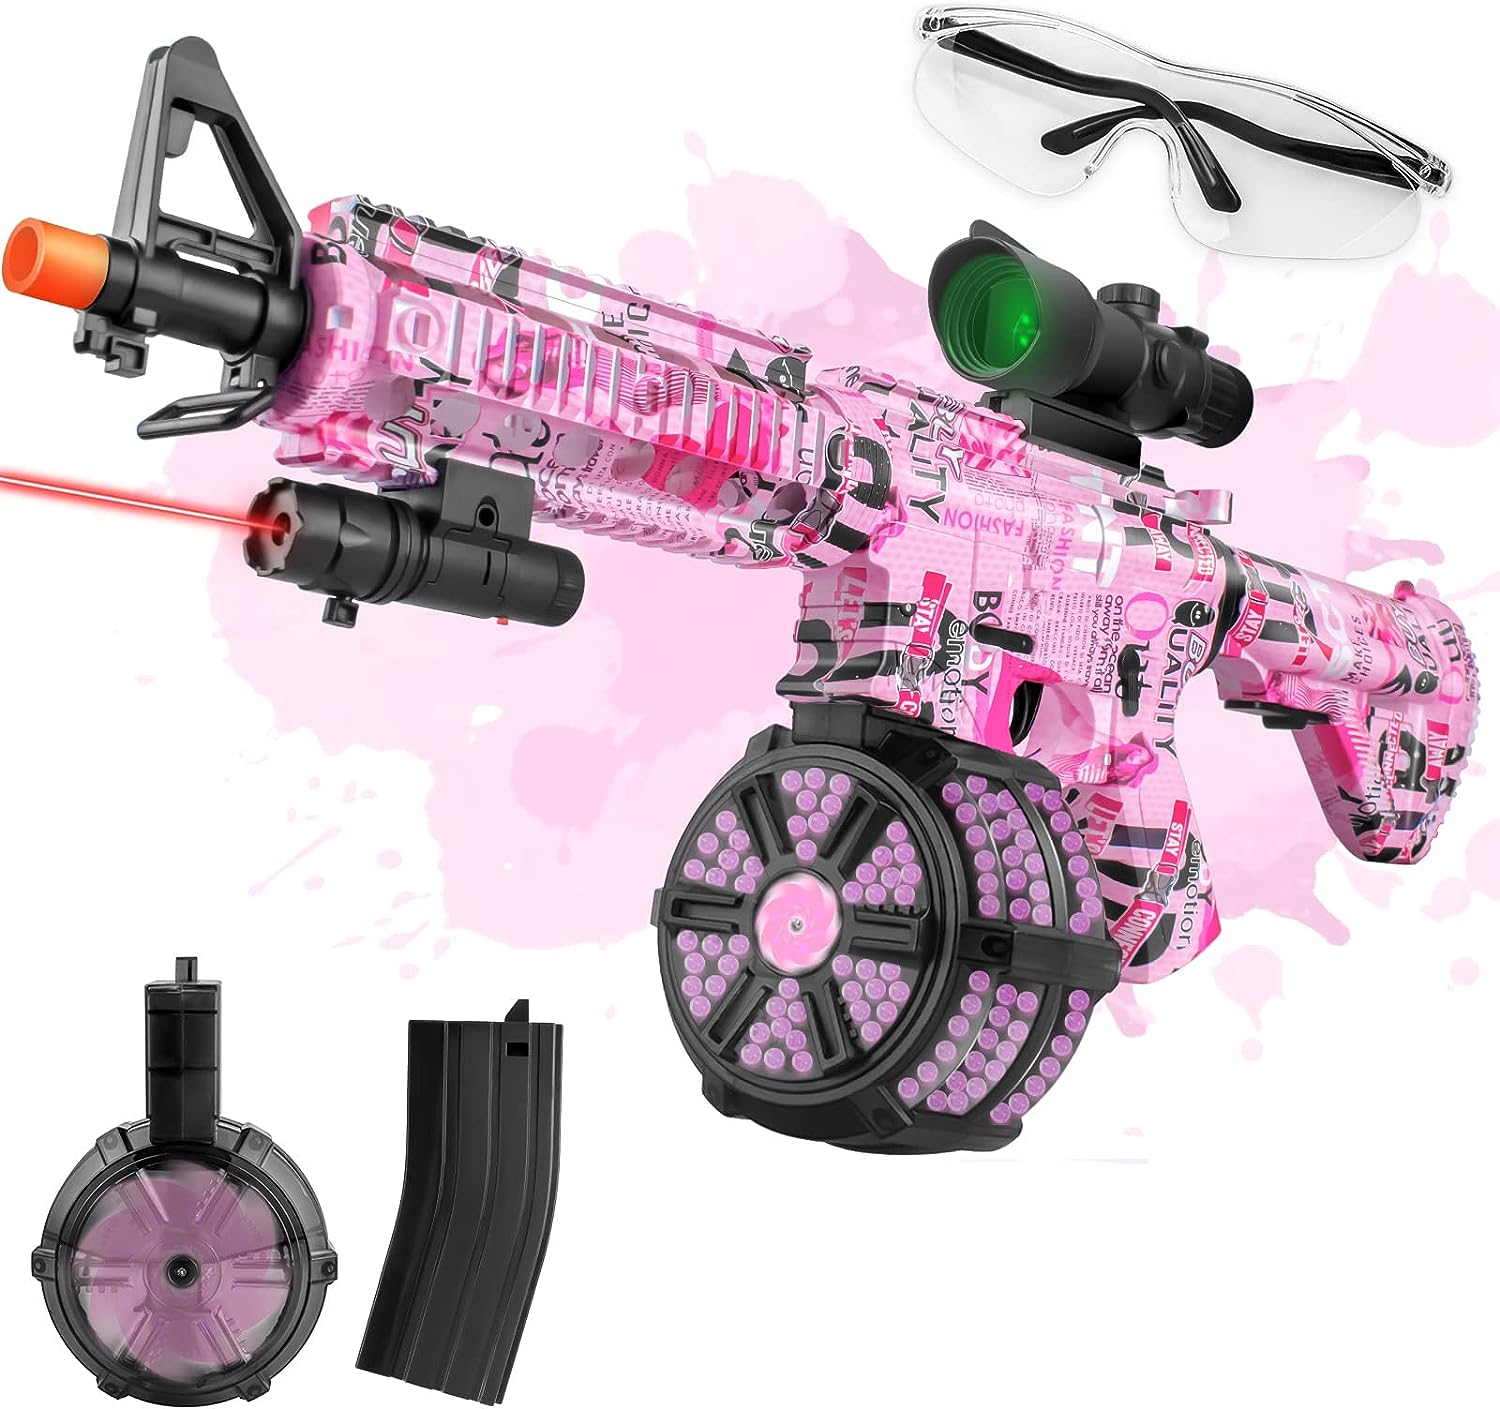 Pink laser orbeez gun with goggles and other accessories